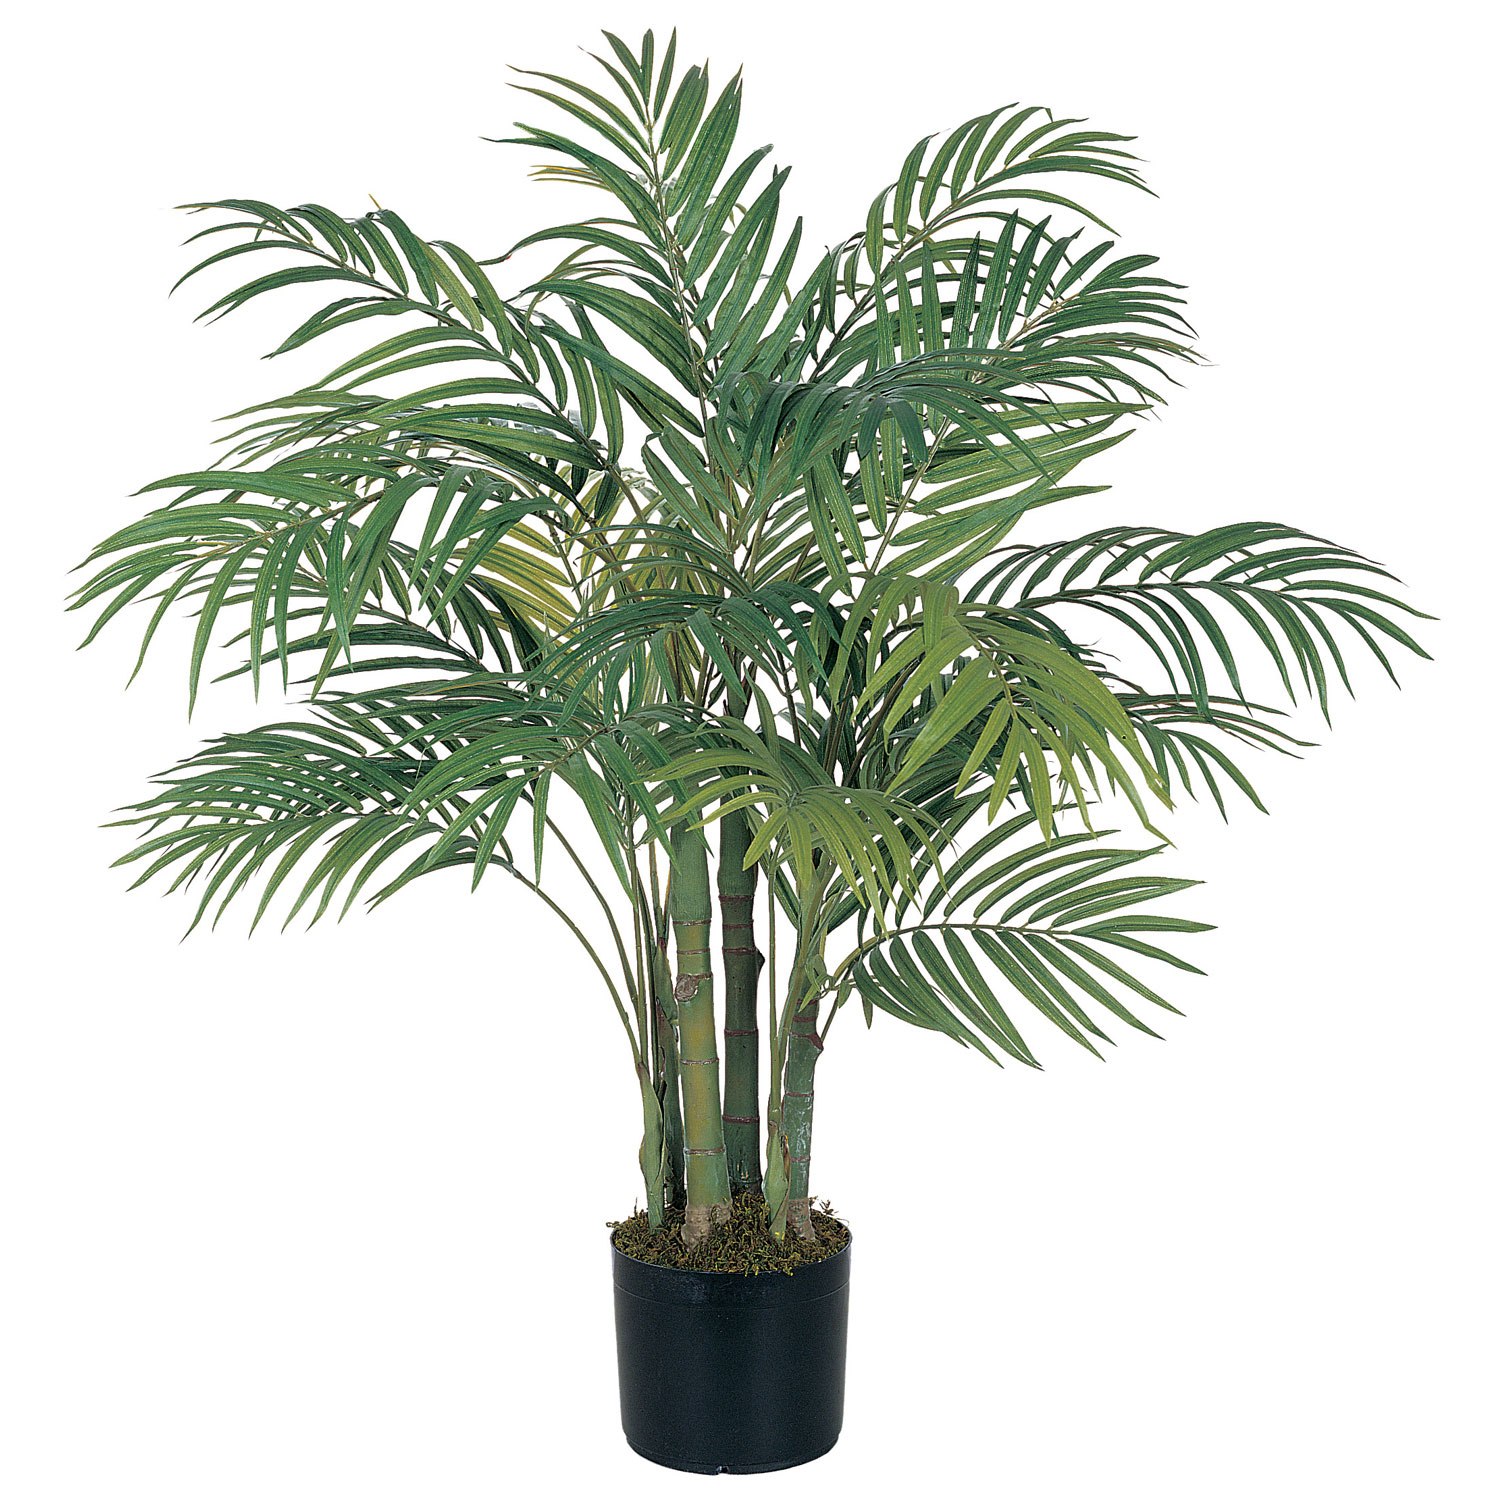 3 Foot Artificial Areca Palm Tree: Potted